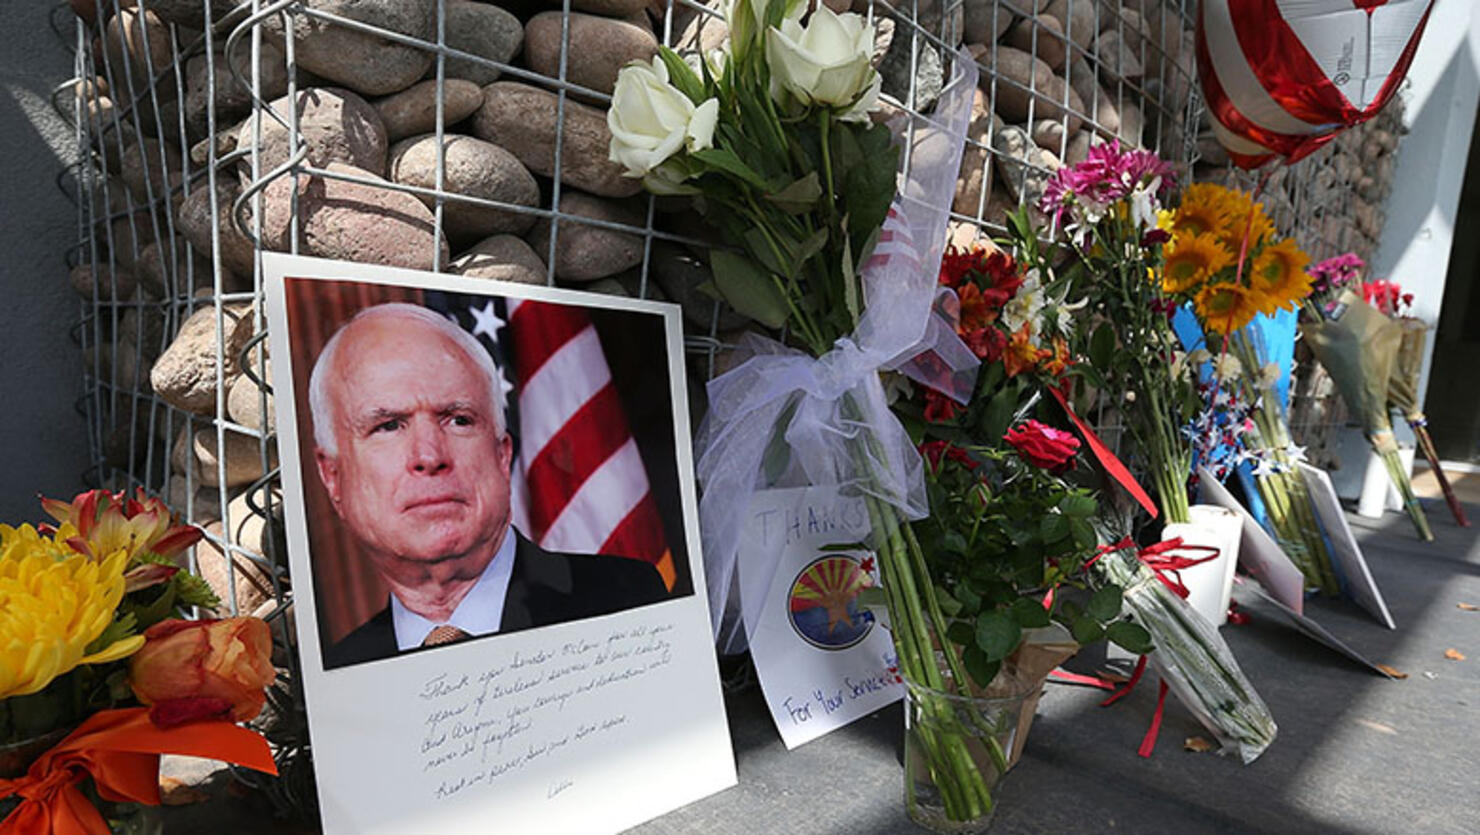 Items and personal notes are left outside the office of Sen. John McCain (R-AZ) as people pay their respects to the late Arizona senator on August 26, 2018 in Phoenix, Arizona